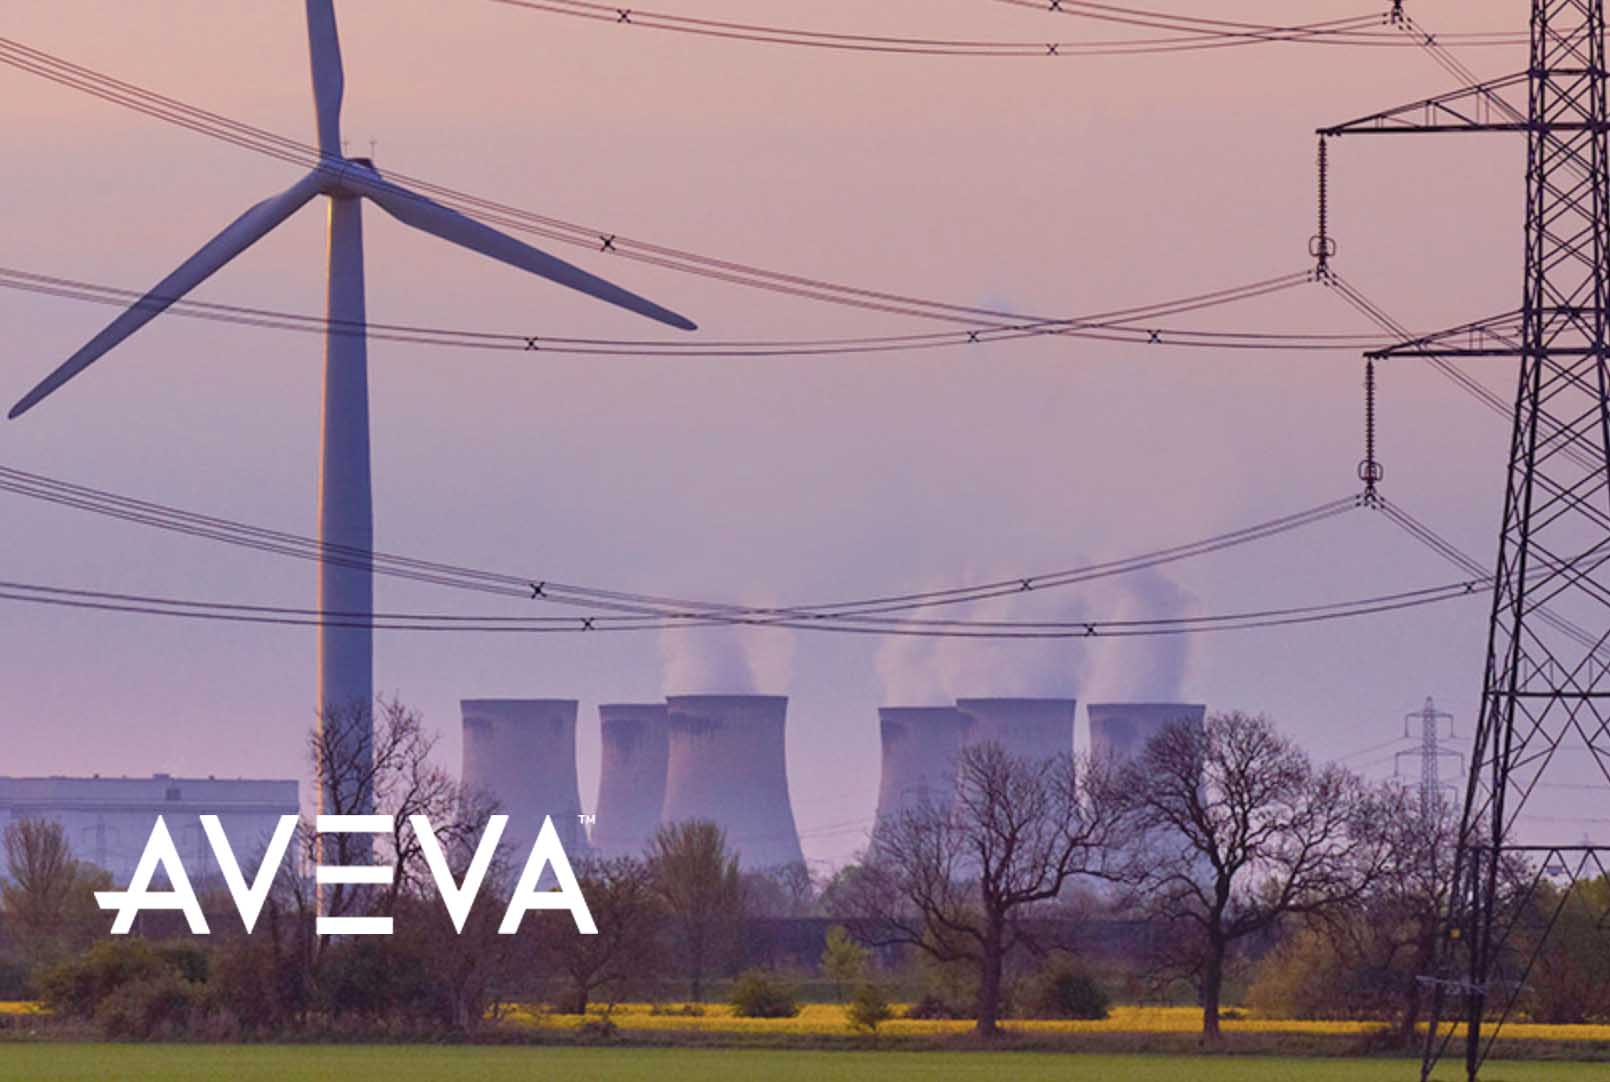 AVEVA Releases First Sustainability Report, Charting Progress to Net Zero and Gender Equality